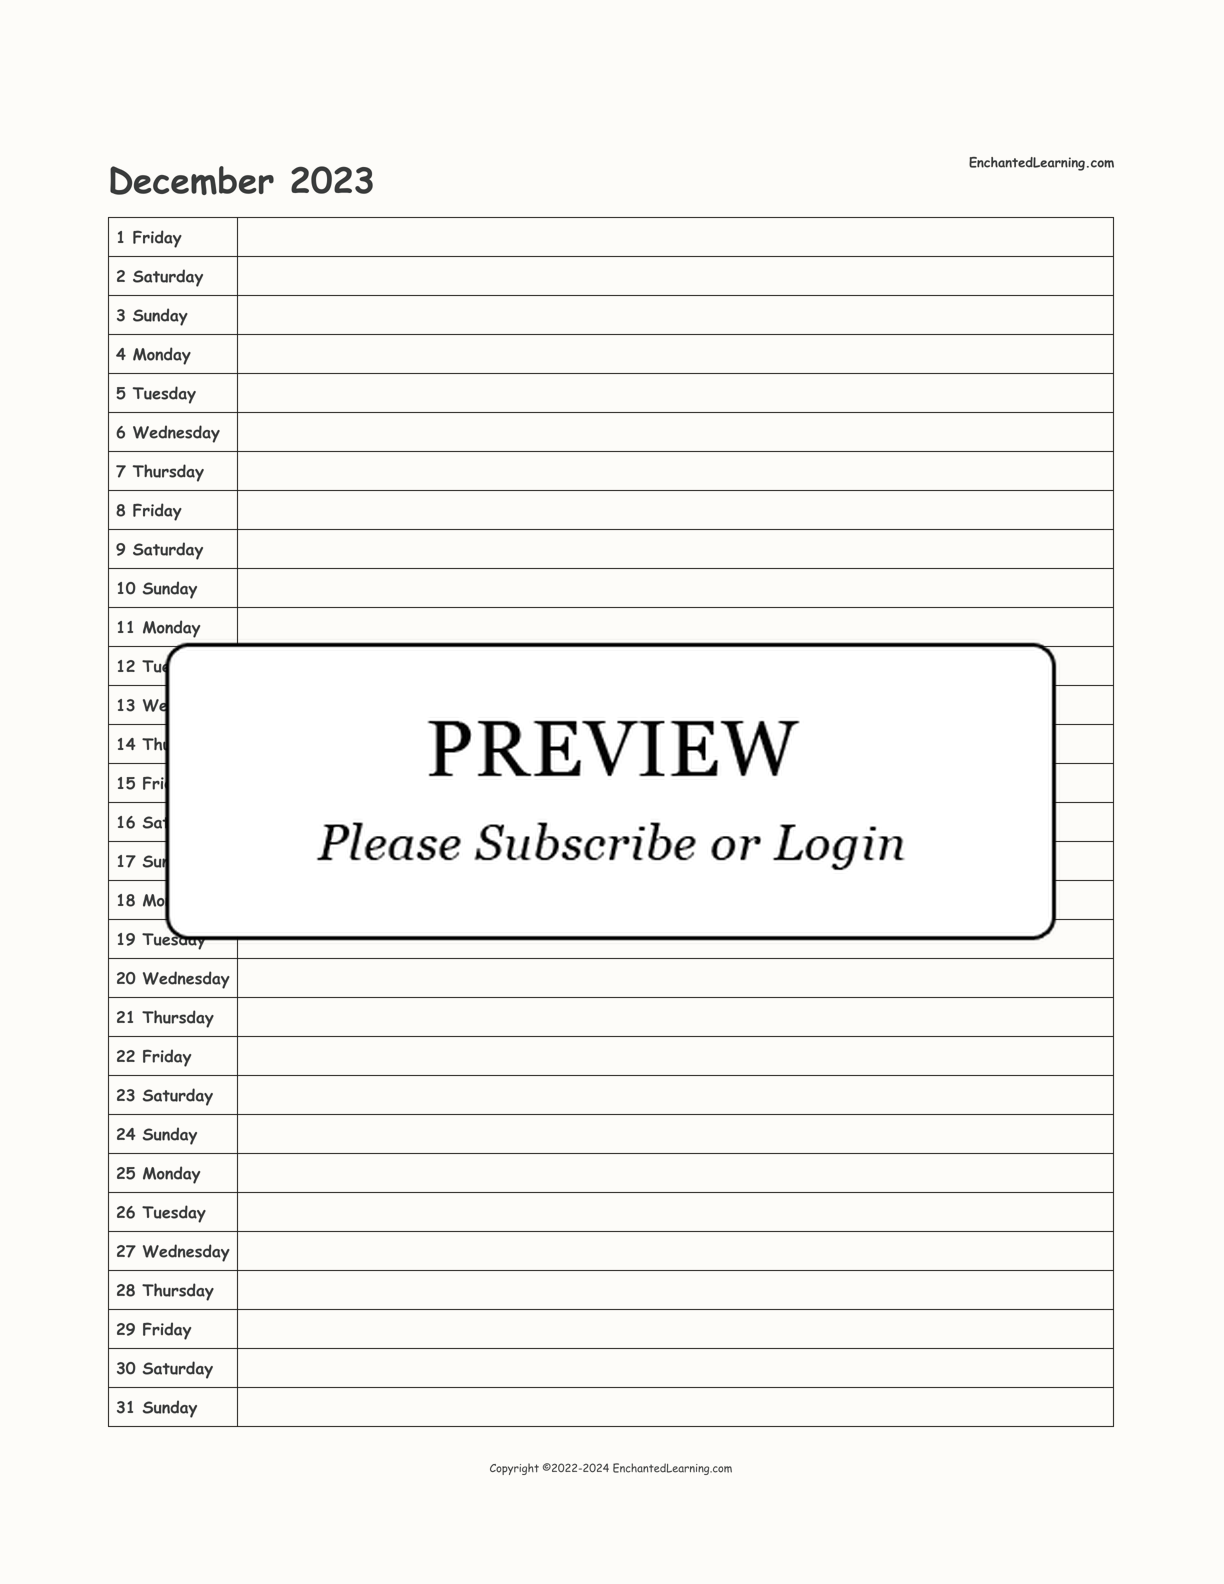 2023 Scheduling Calendar interactive printout page 12